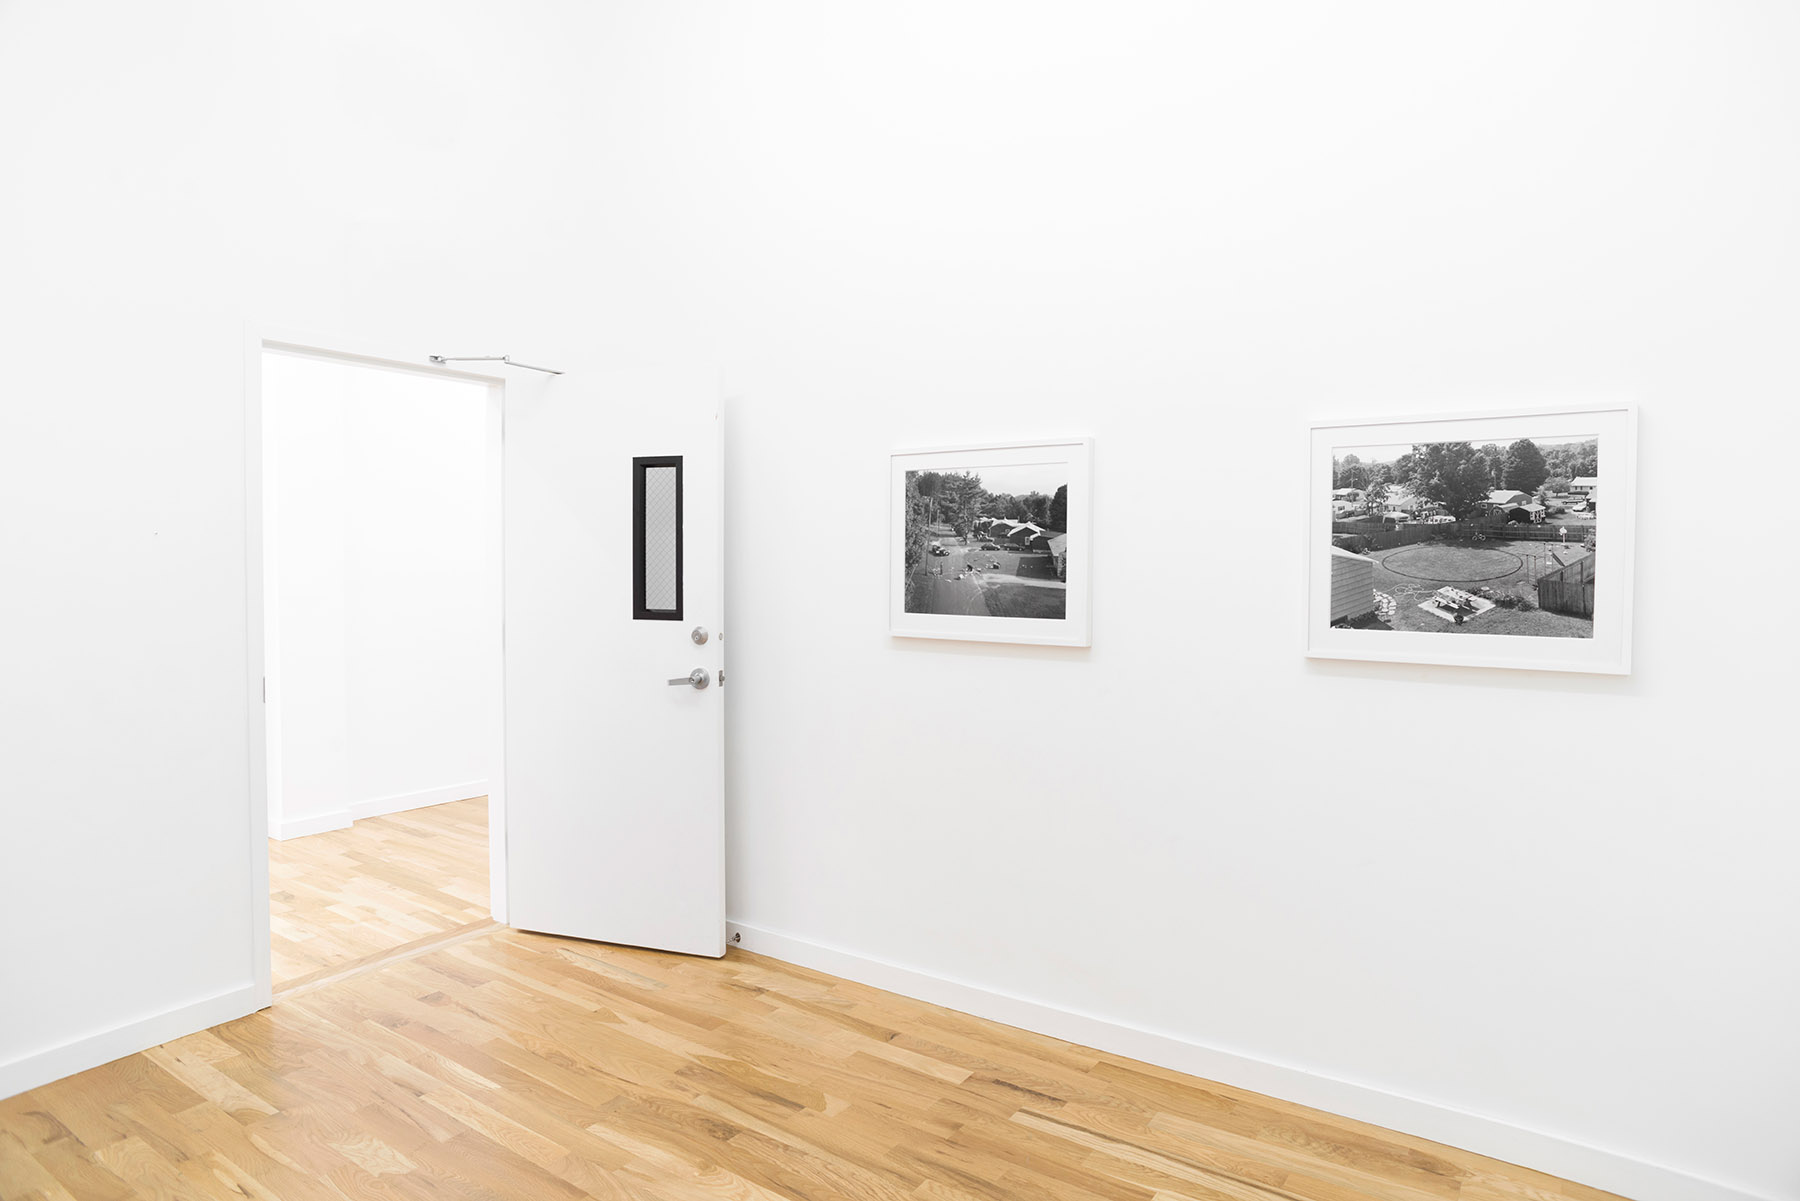 Installation view at DOCUMENT